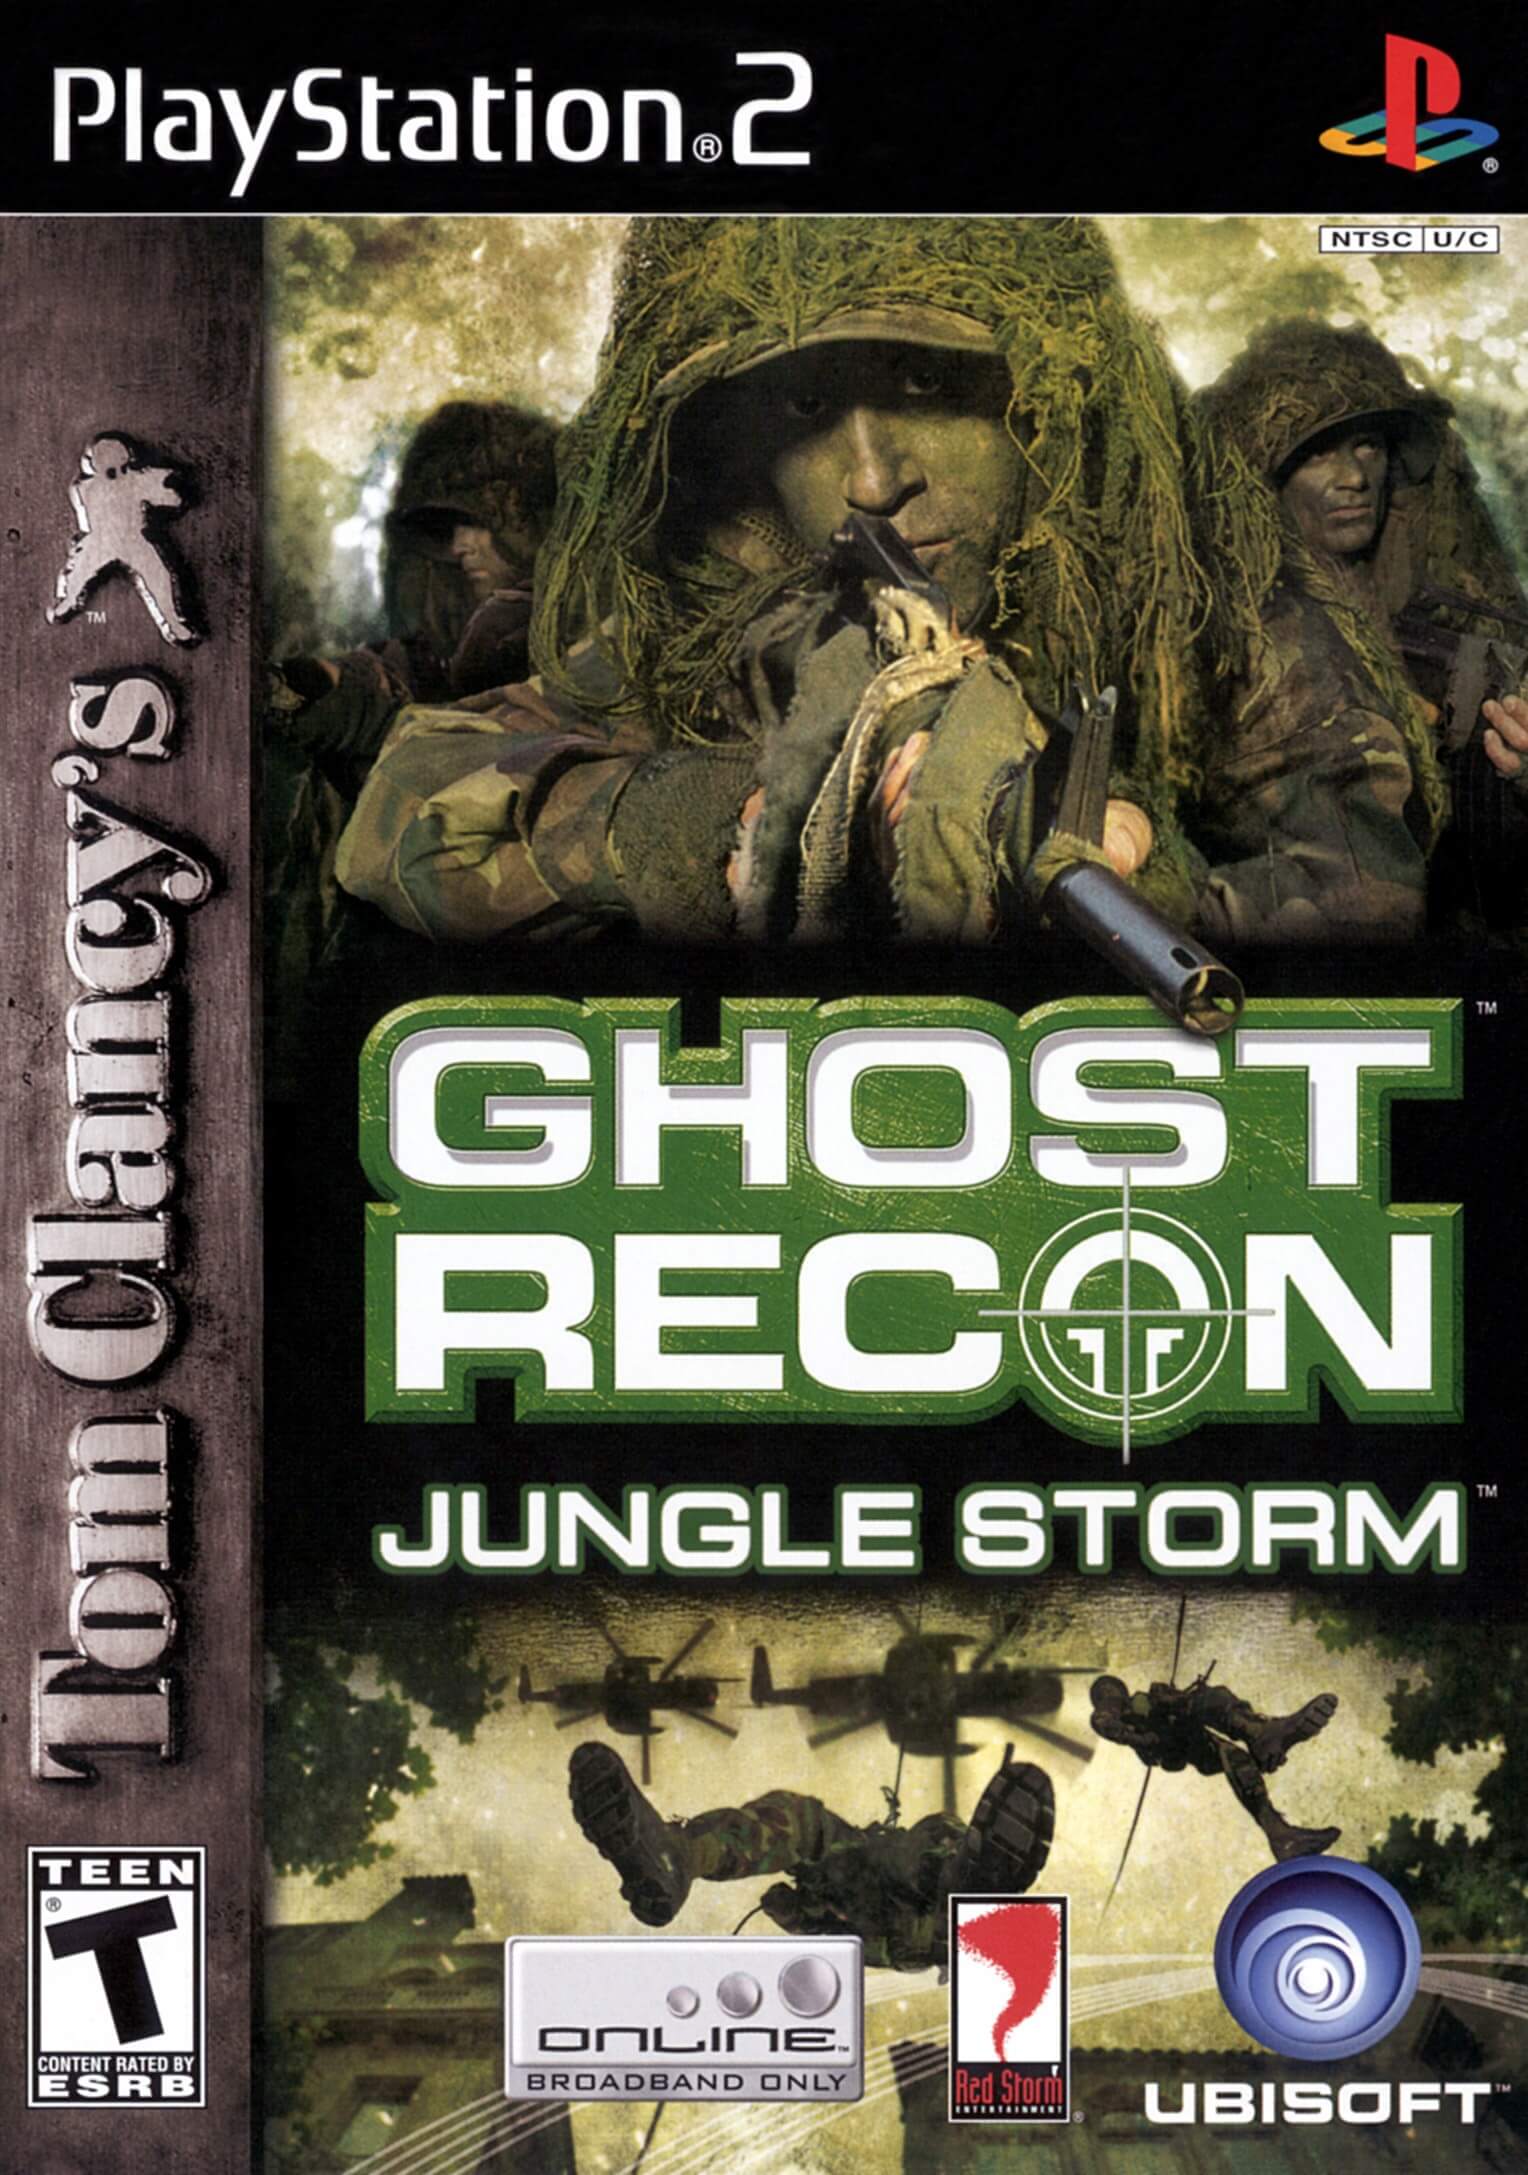 Tom Clancy’s Ghost Recon: Jungle Storm